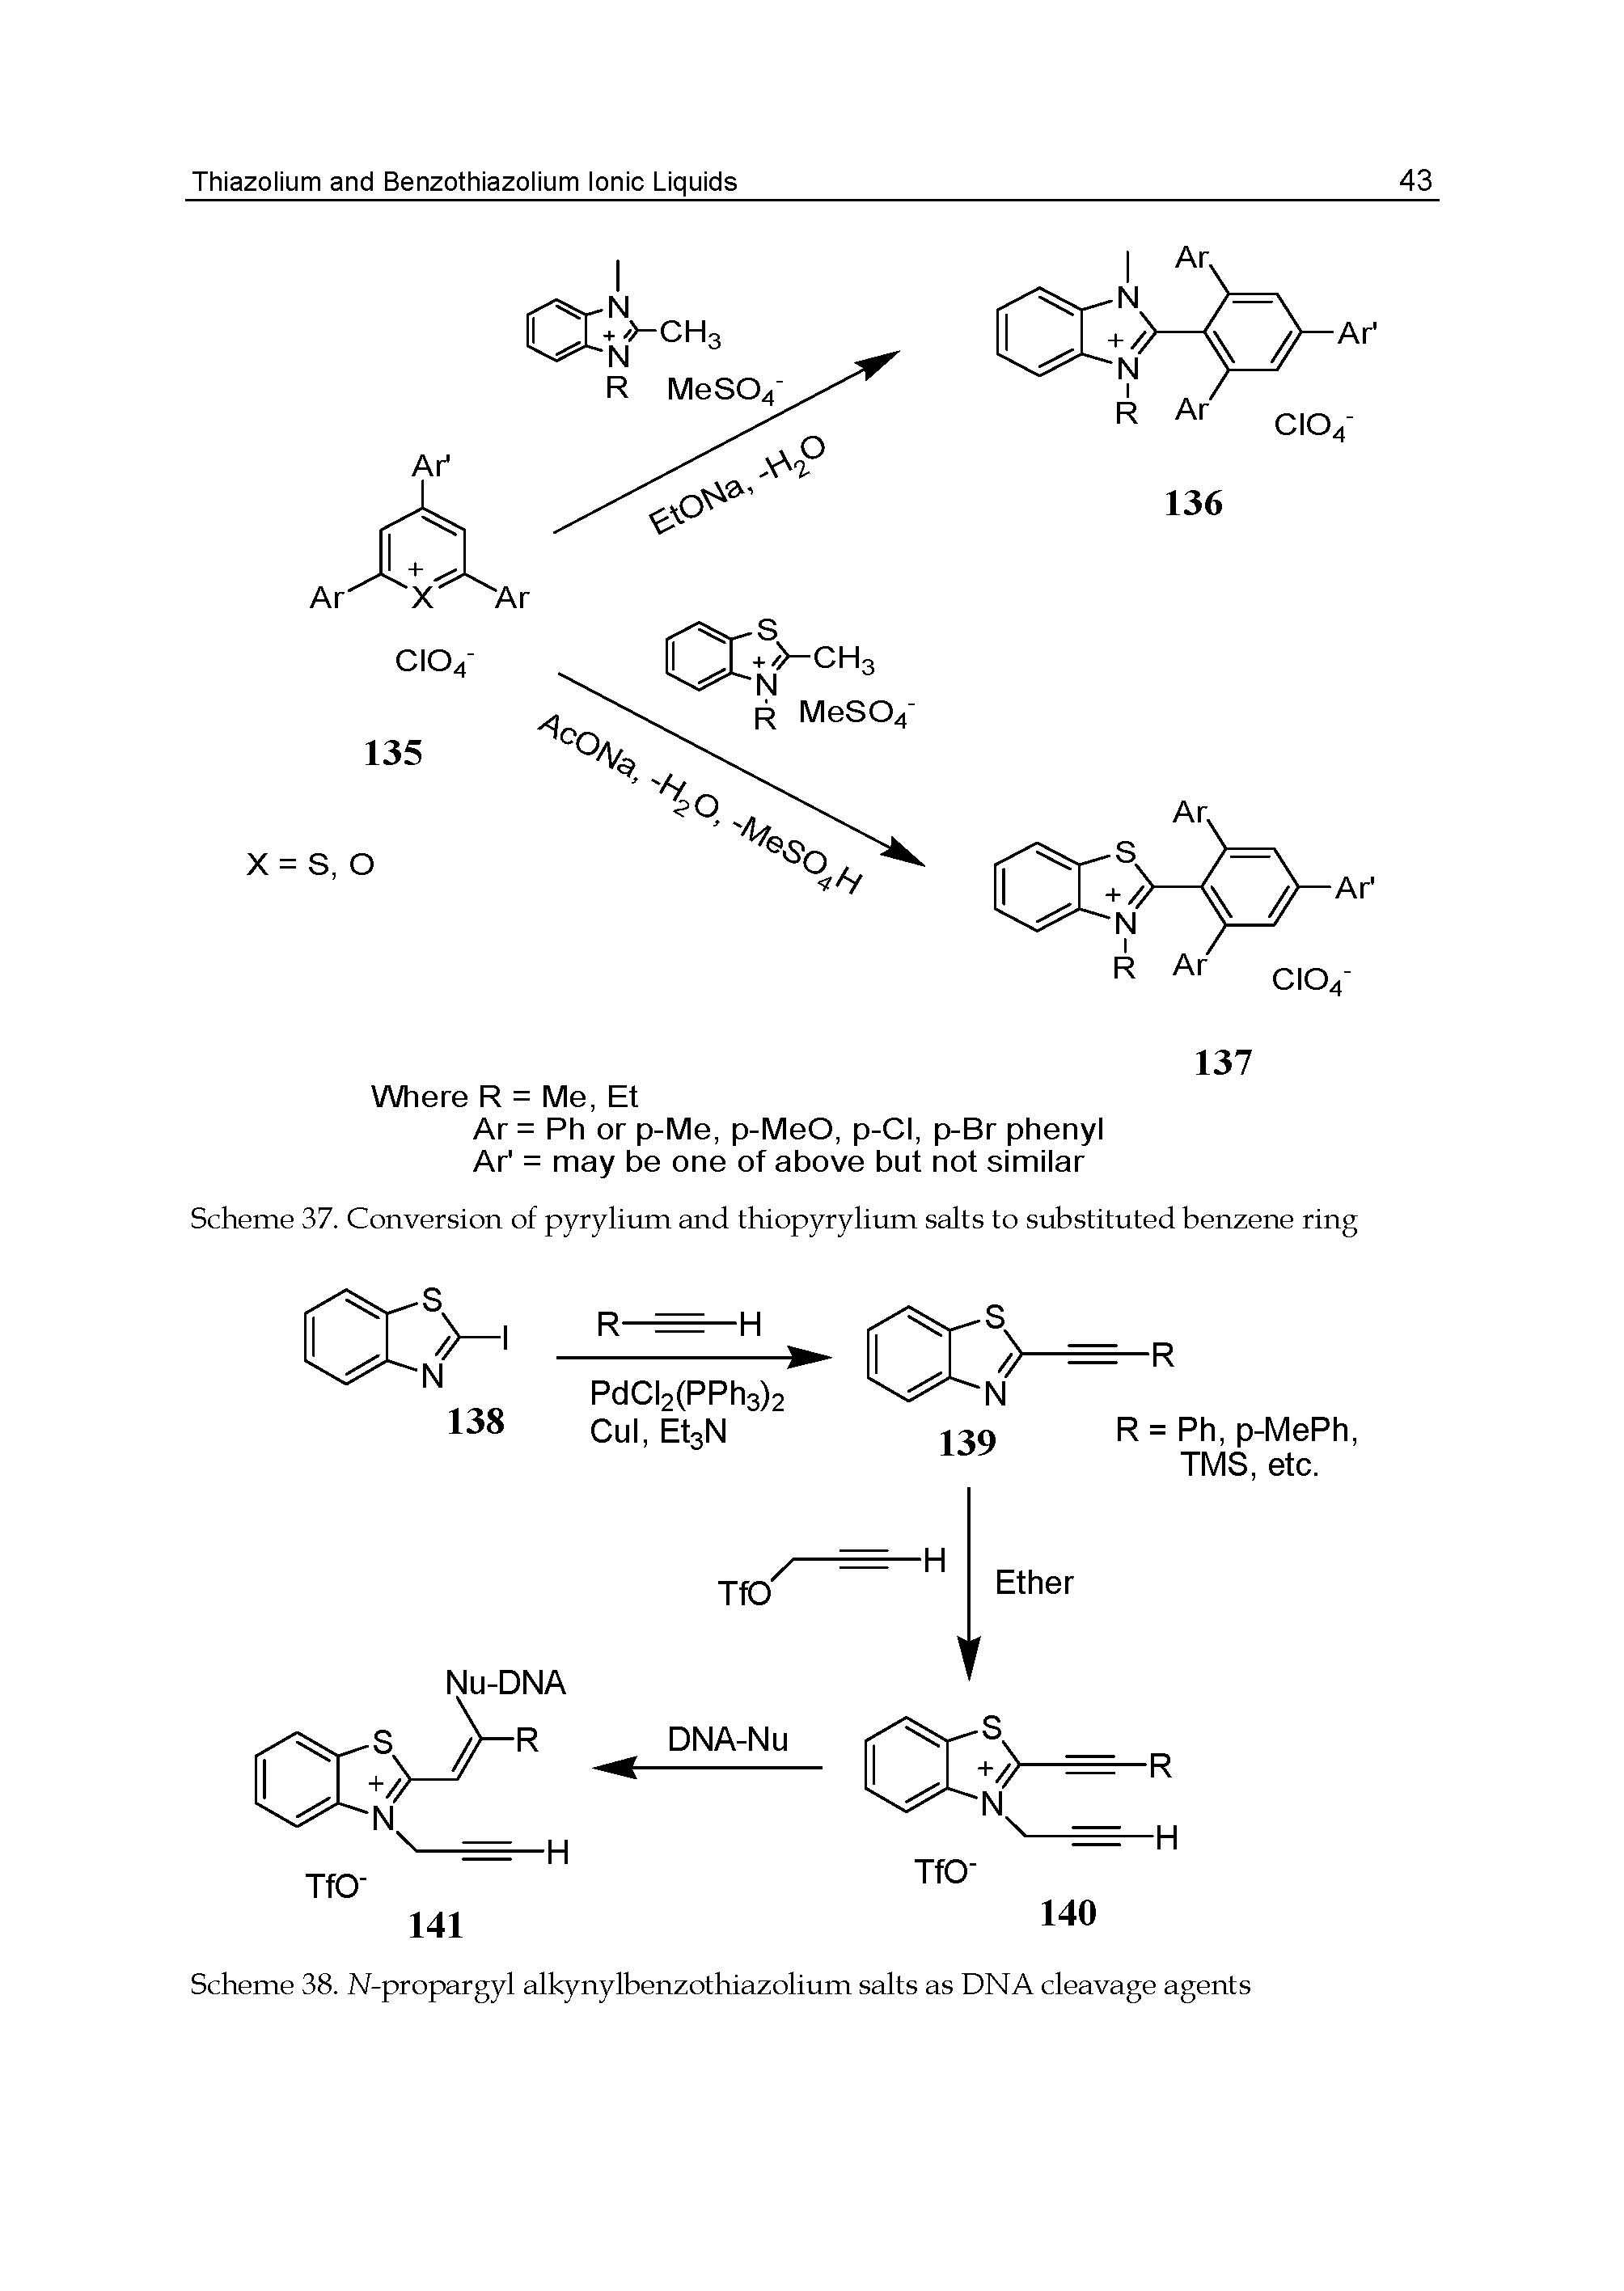 Scheme 37. Conversion of pyrylium and thiopyrylium salts to substituted benzene ring...